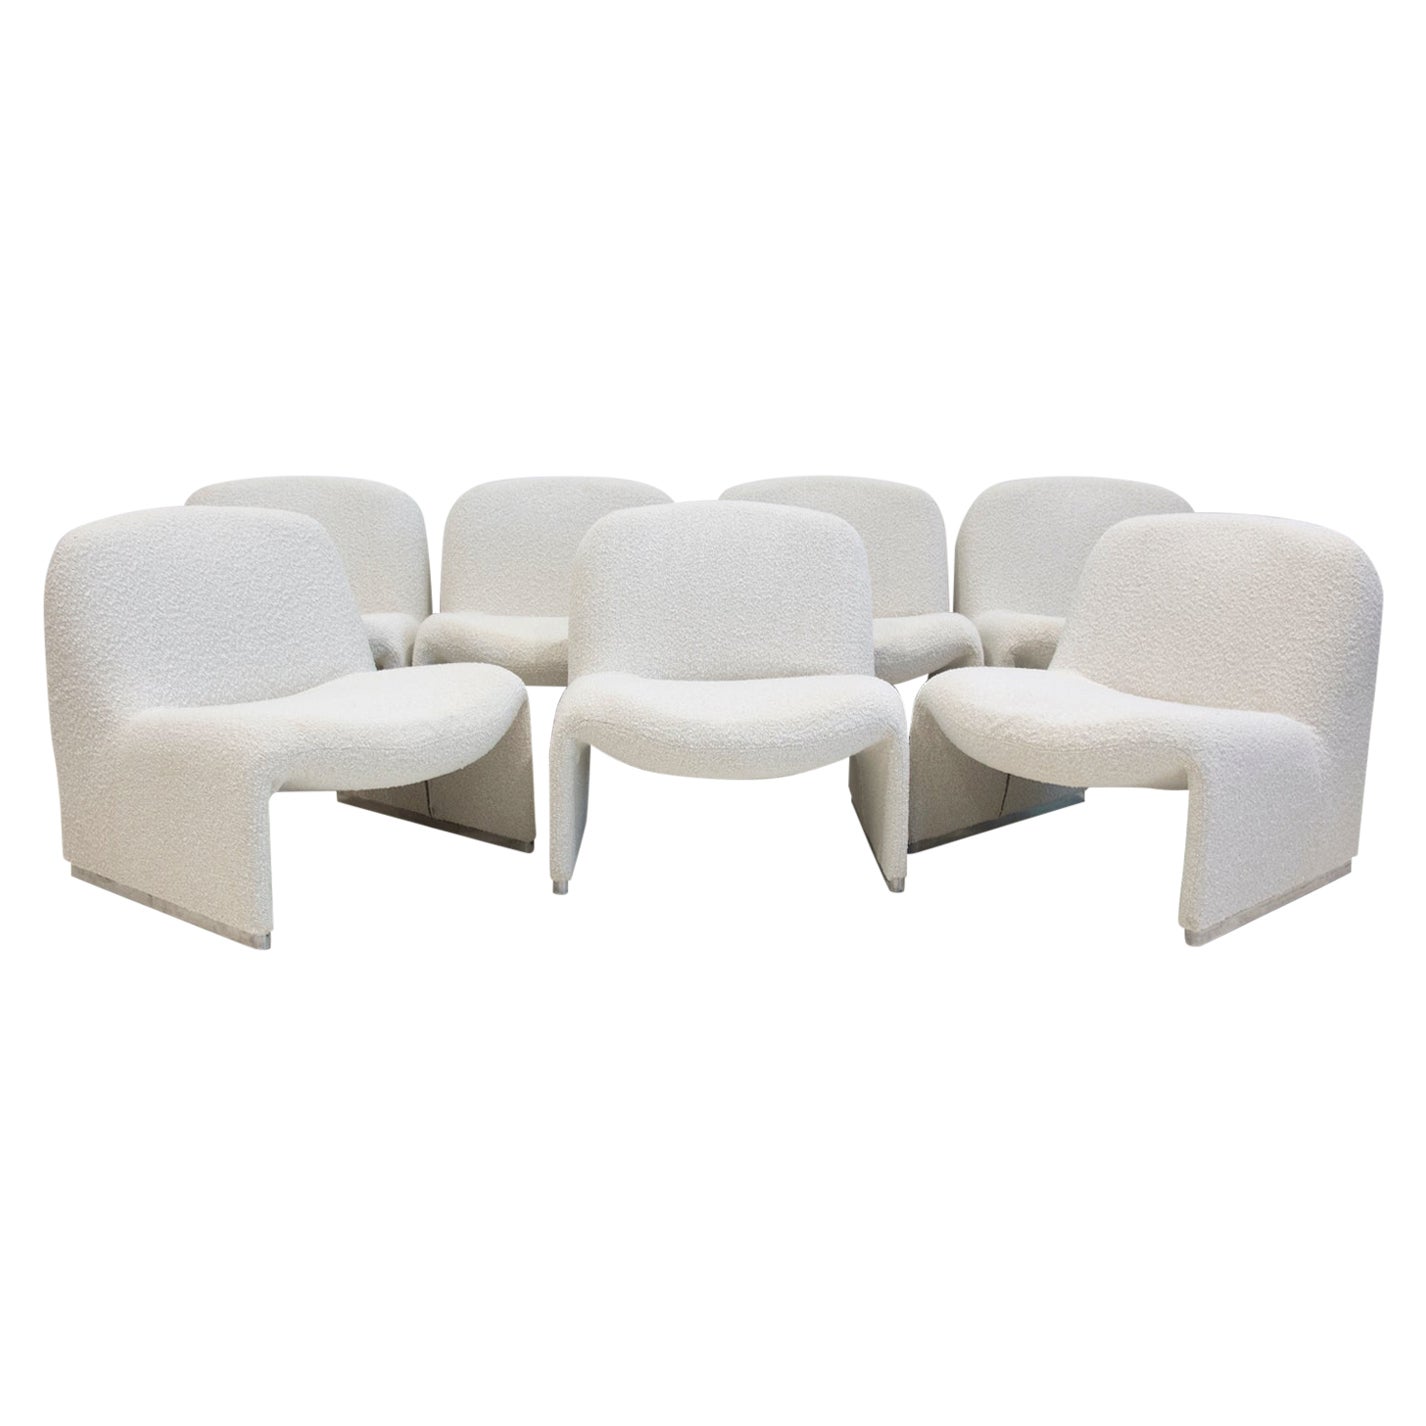 Five White Bouclé Fabric Upholstered Giancarlo Piretti Alky Easy Chairs For Sale